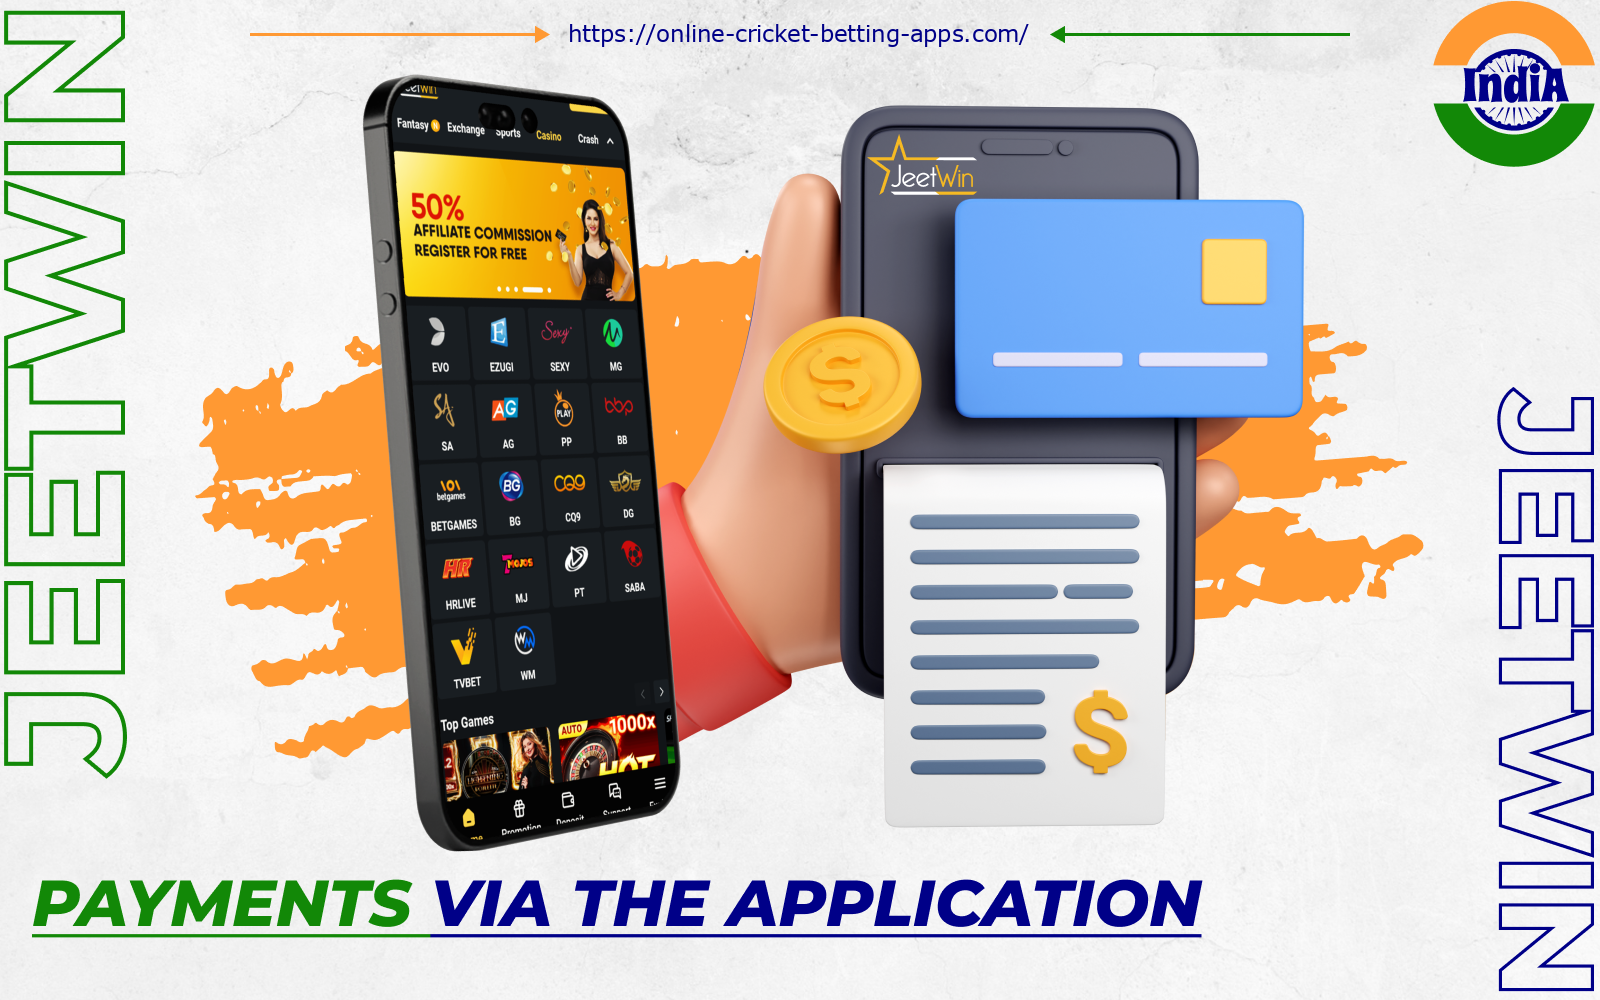 Jeetwin app users from India can recharge or withdraw money from their balance at any time